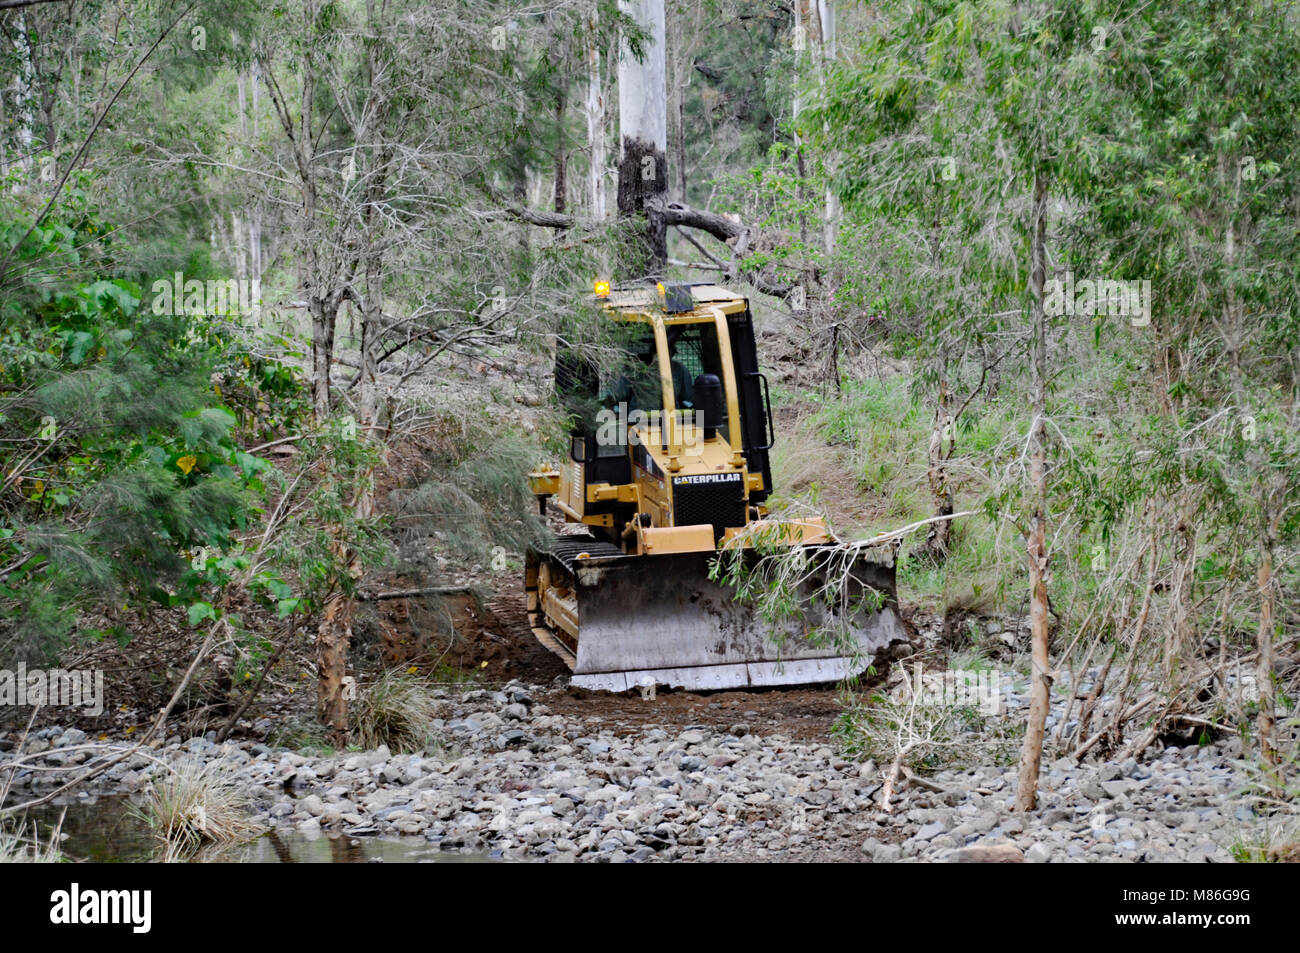 D4 DOZER WORKING TO CLEAR WATER WAYS Stock Photo